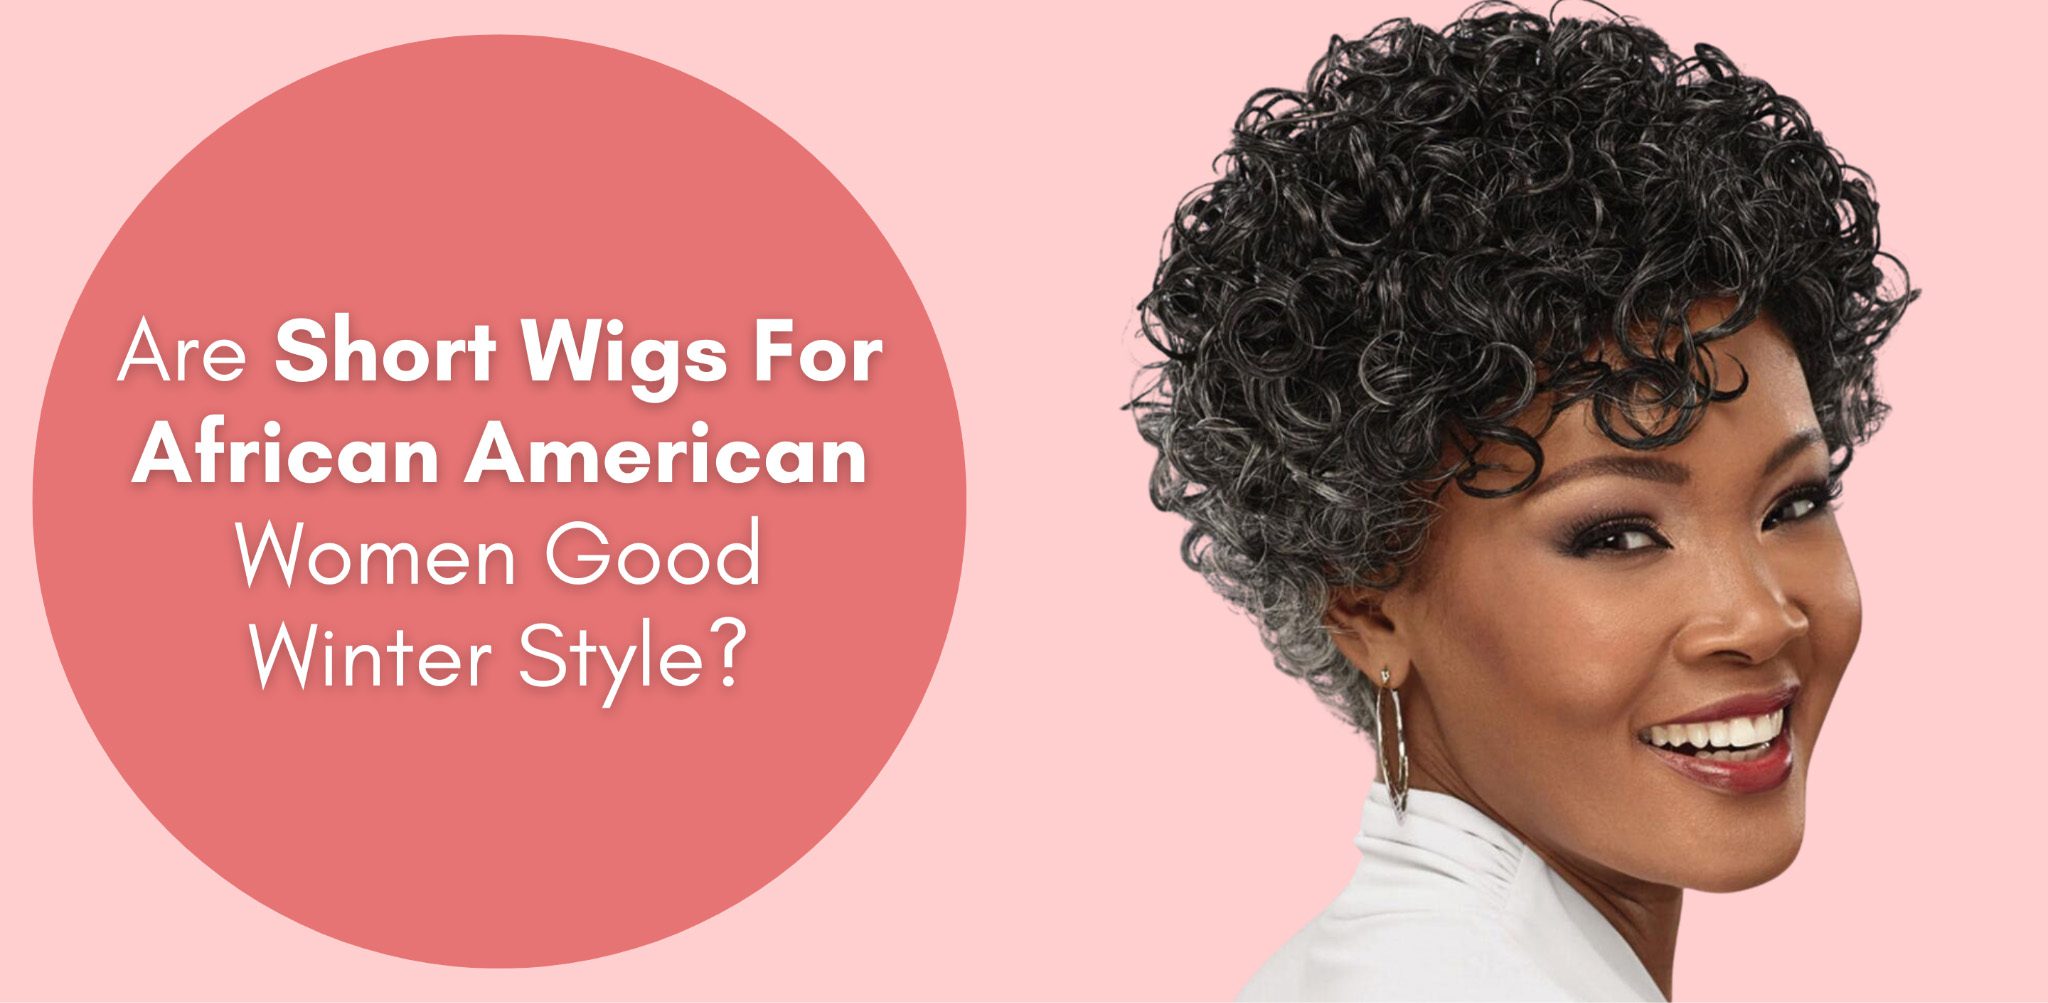 Are Short Wigs For African American Women Good Winter Style?